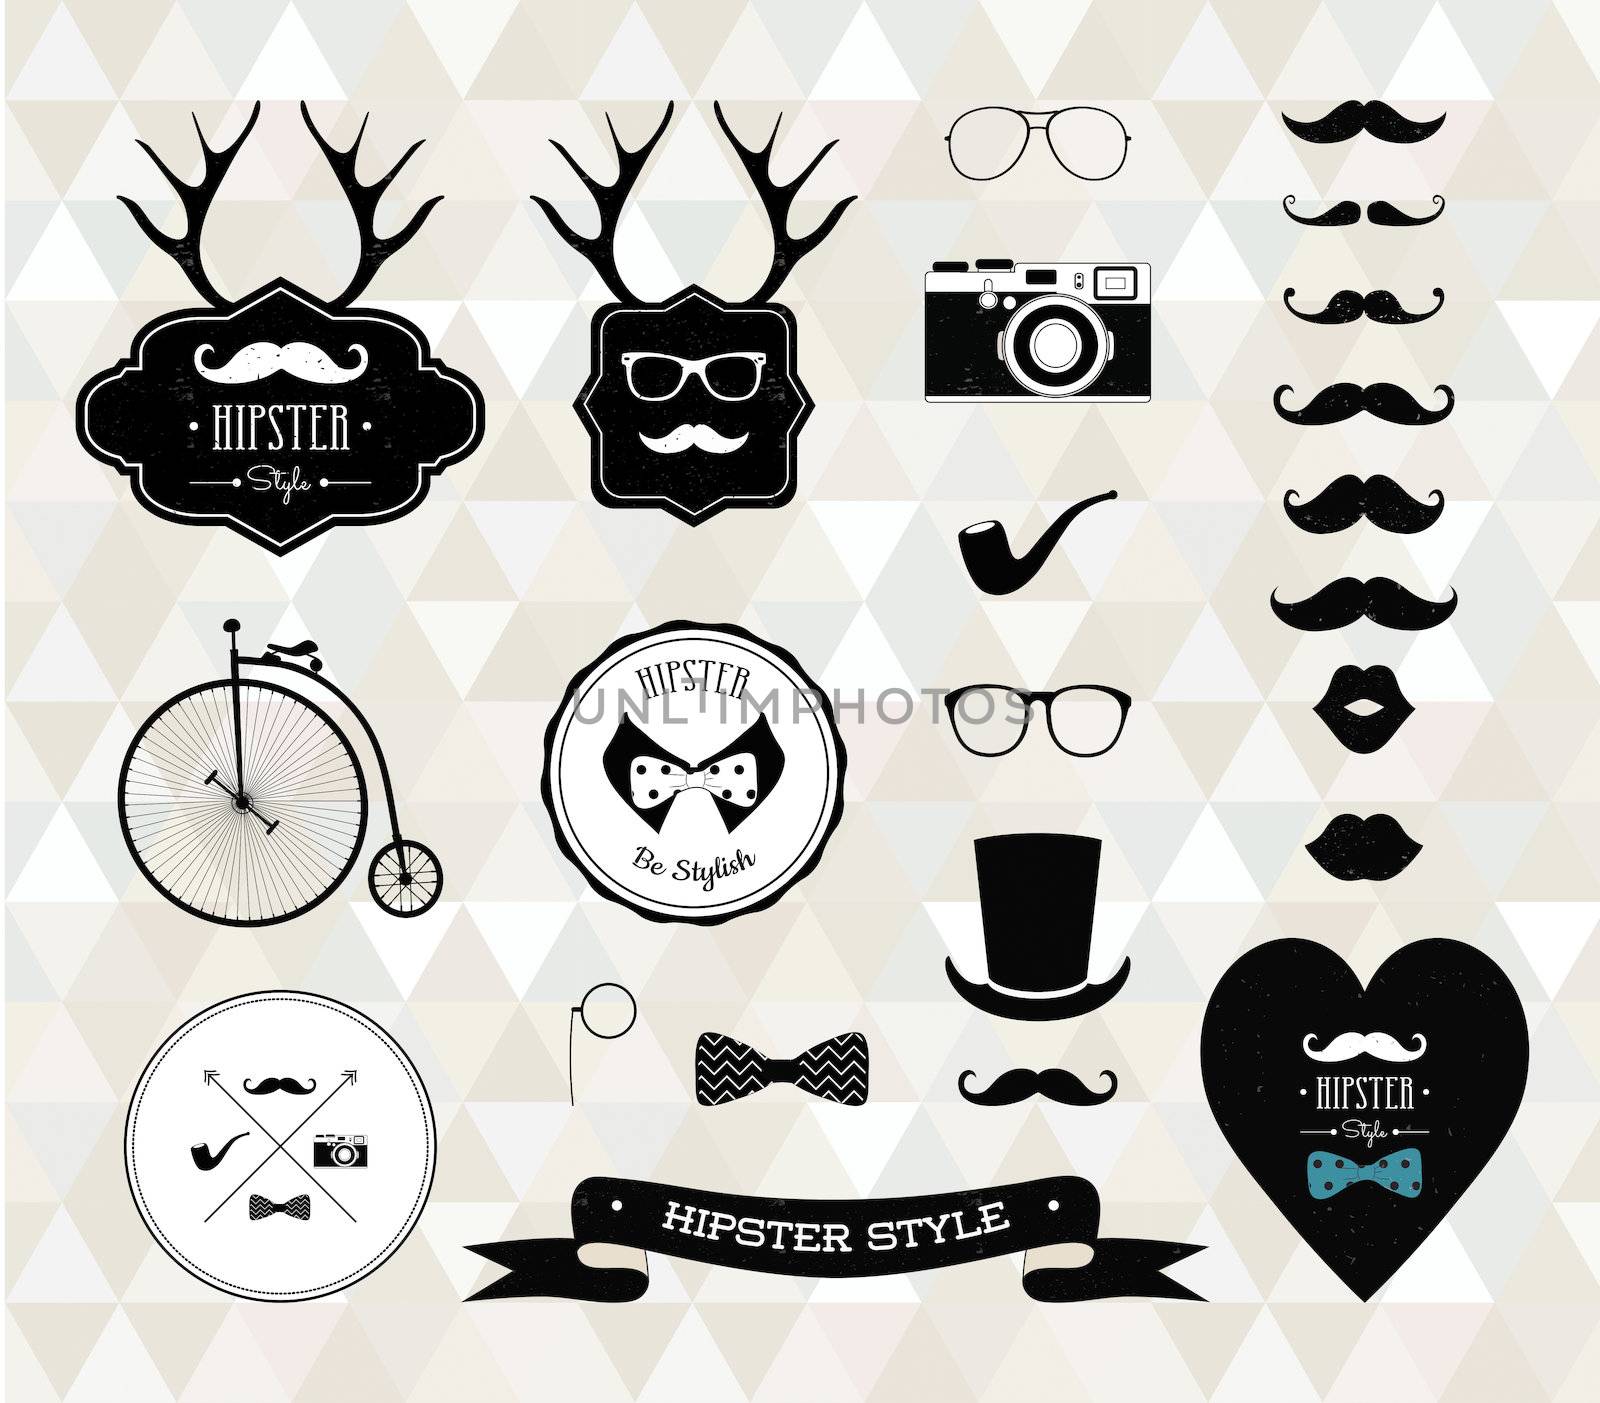 Hipster style elements, icons and labels. Vector Illustration